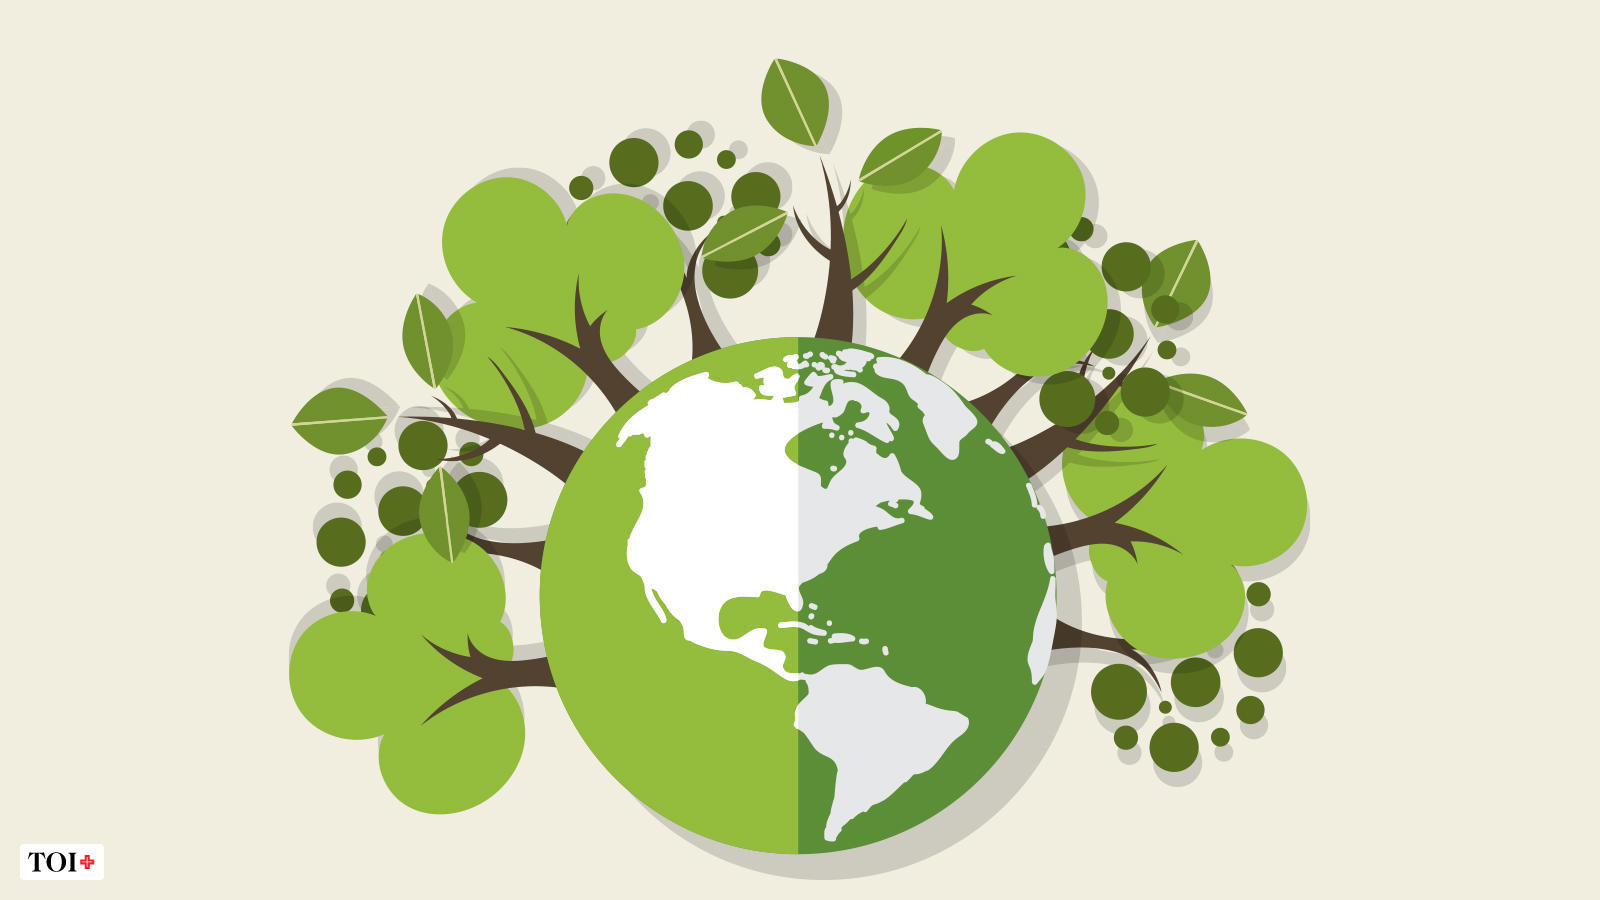 47 facts in honour of the 47th World Environment Day | India News ...